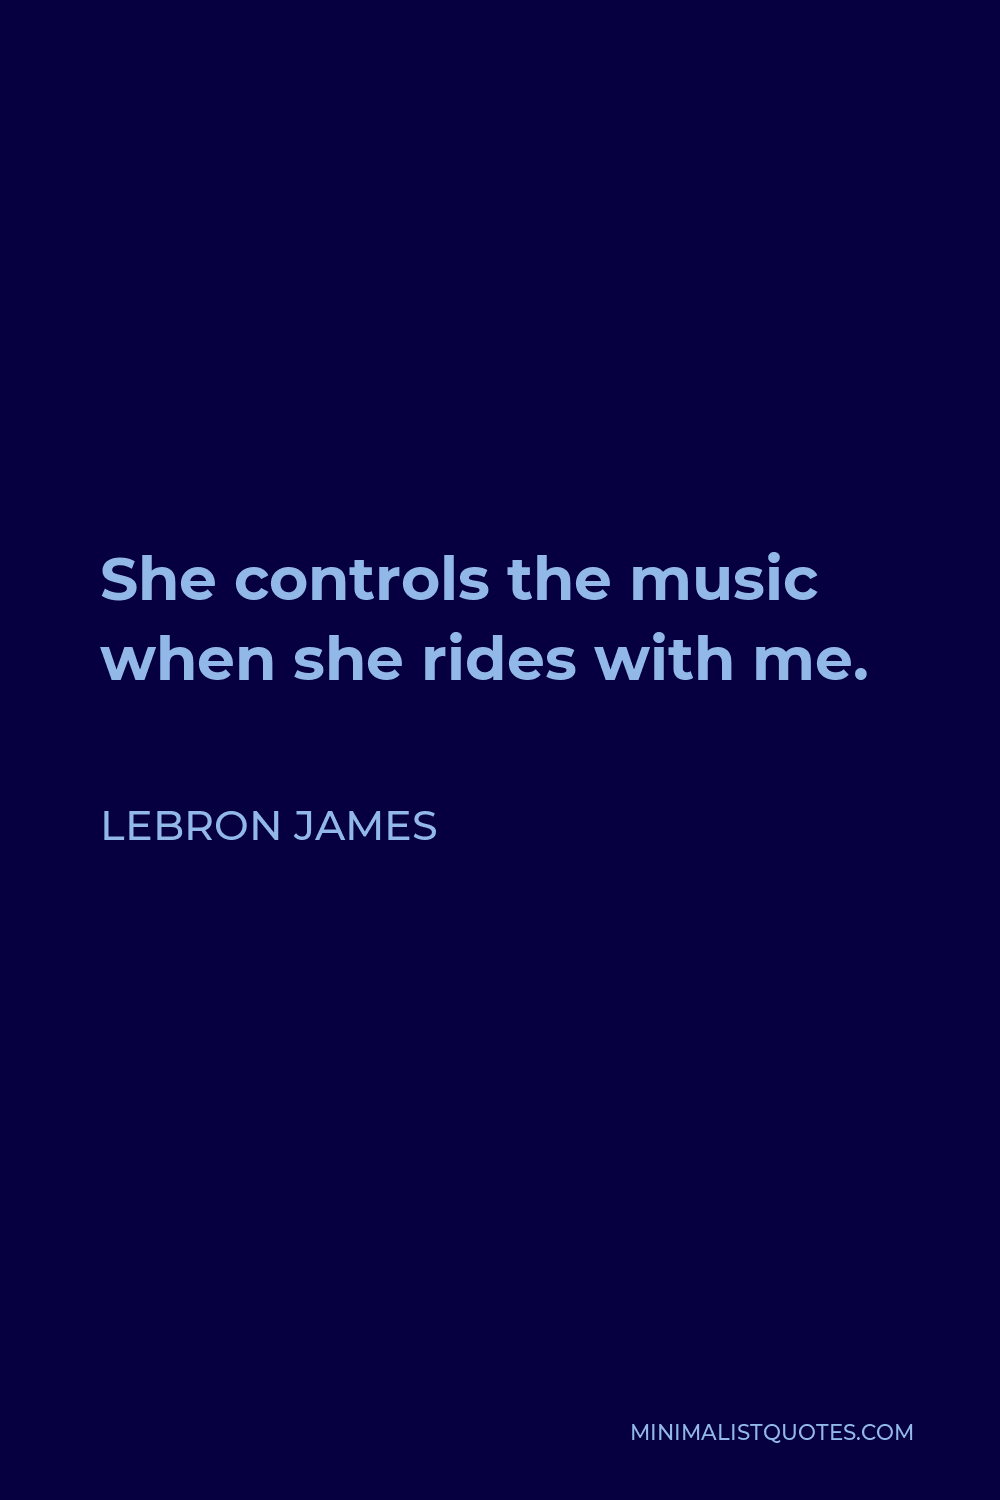 LeBron James Quote - She controls the music when she rides with me.